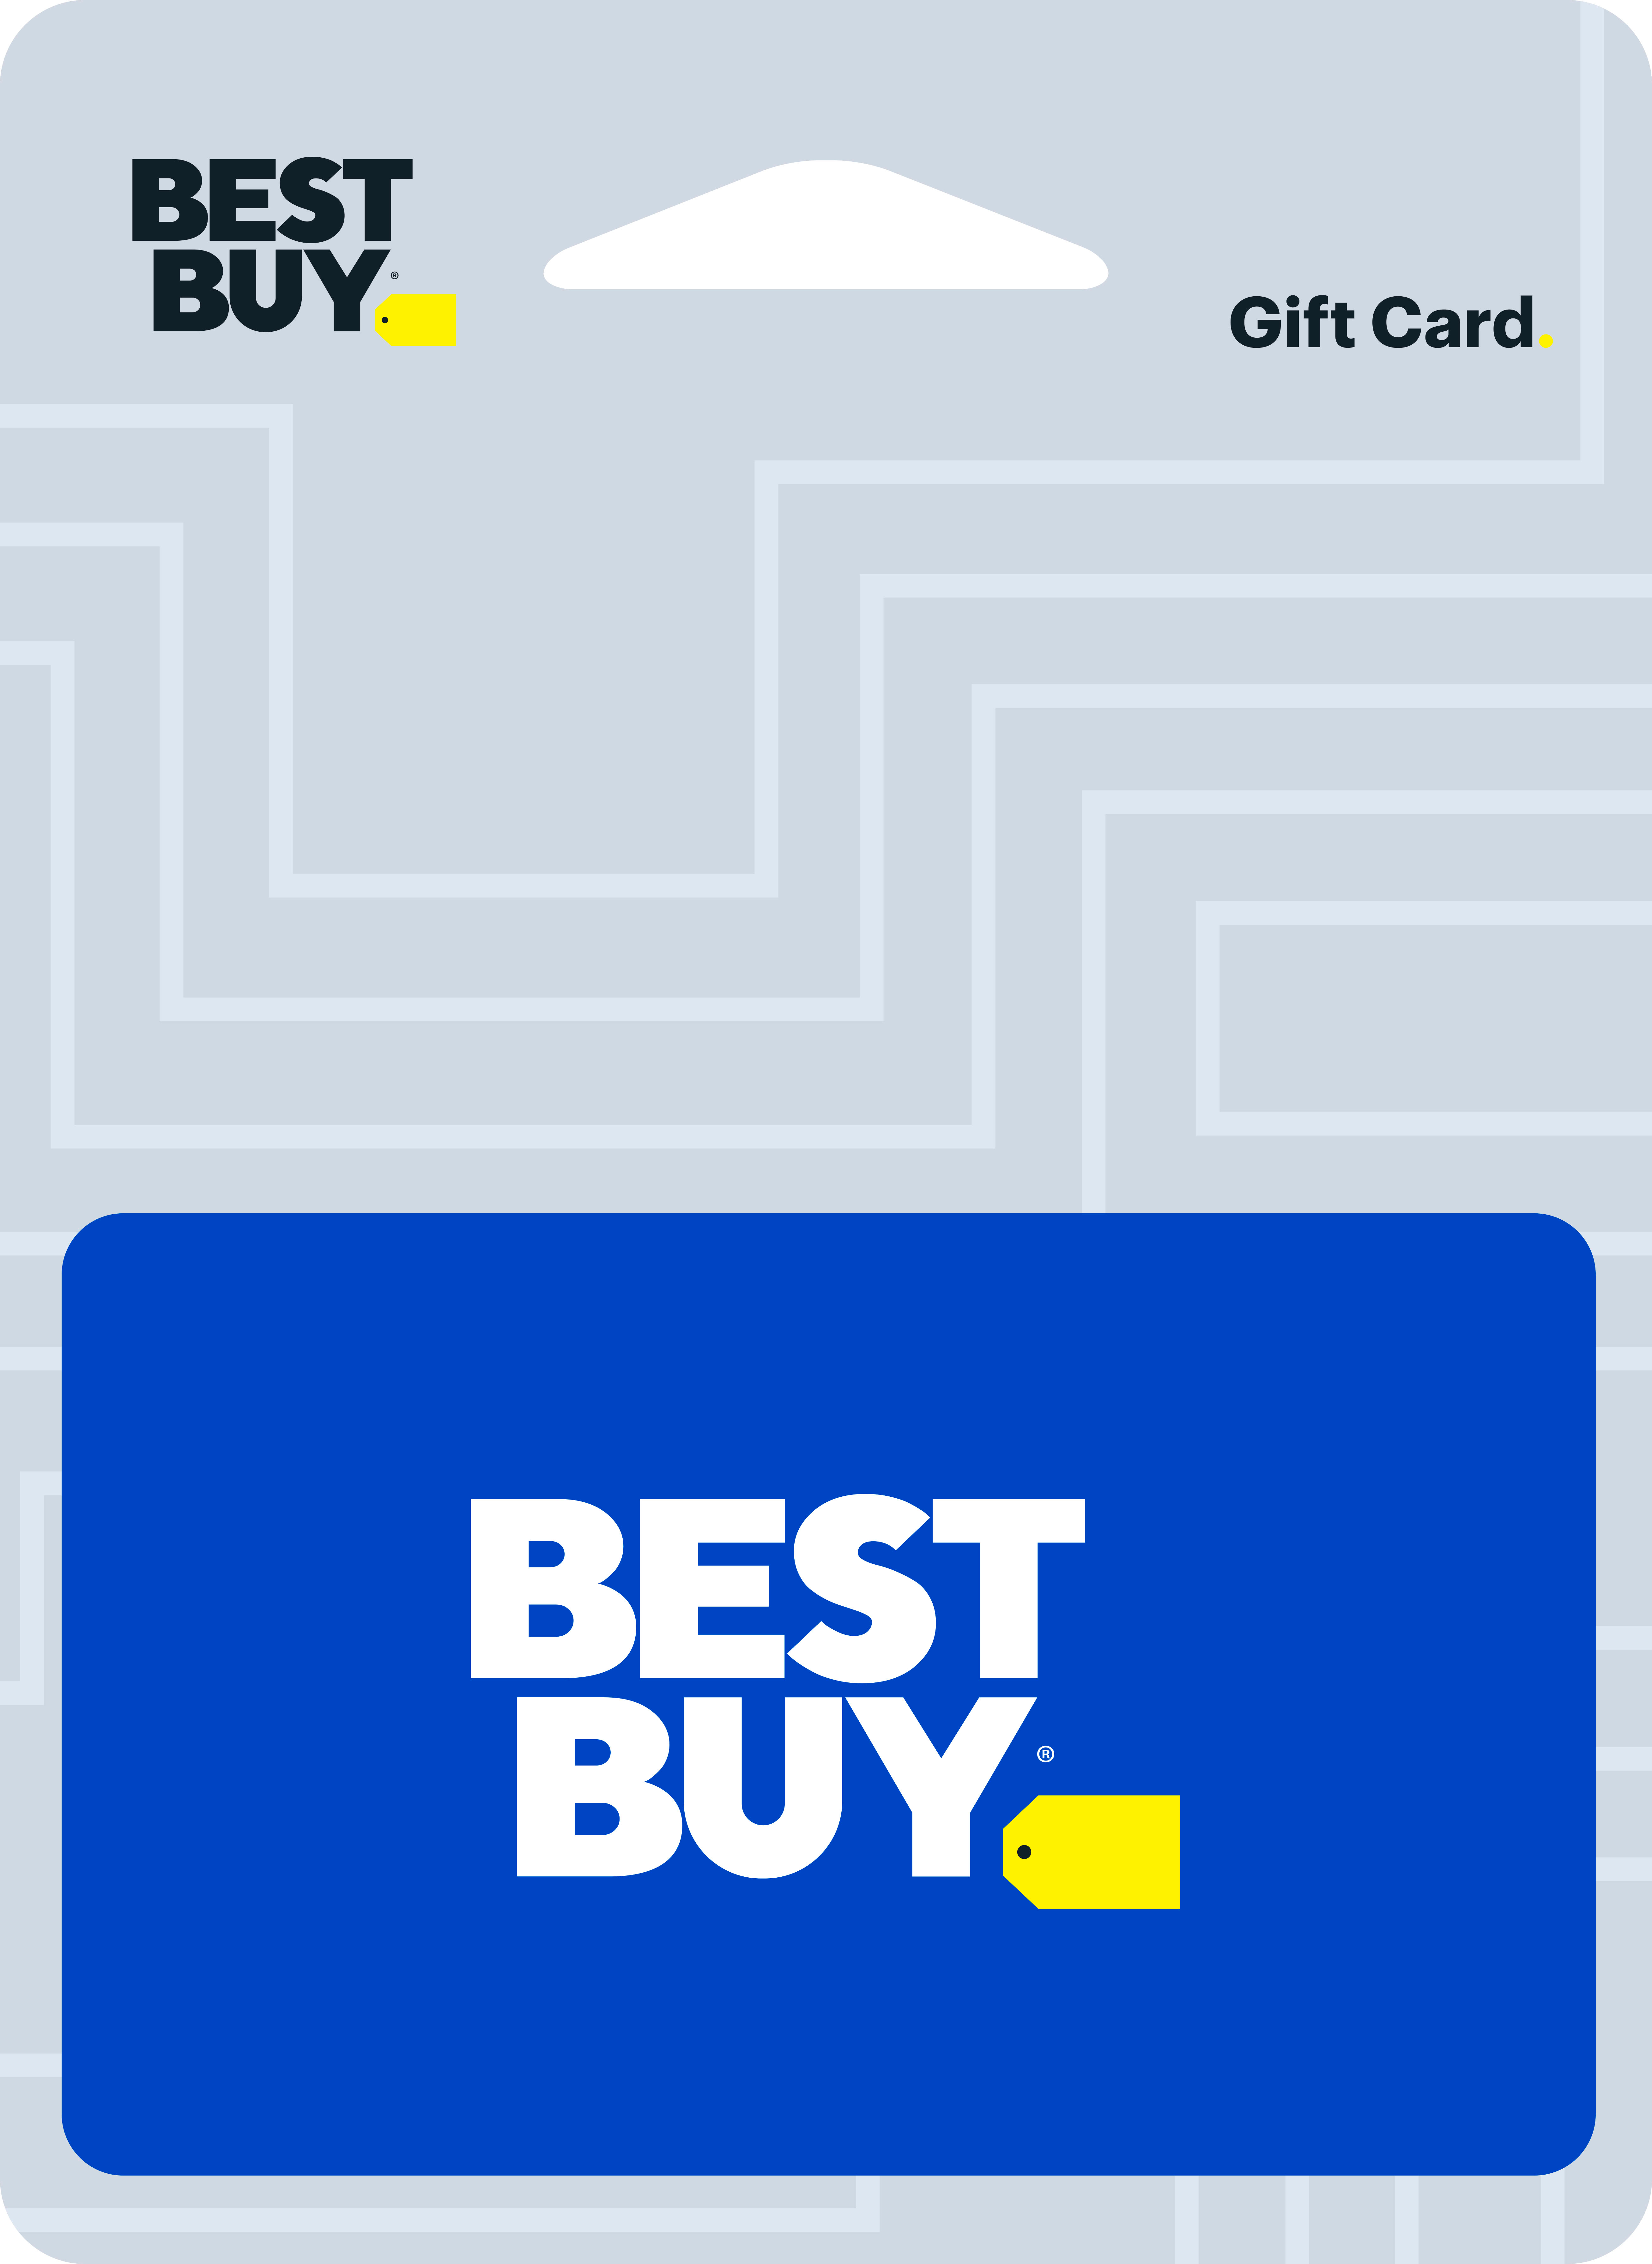 $50 Apple Gift Card App Store, Apple Music, iTunes, iPhone, iPad, AirPods,  accessories, and more APPLE GIFT CARD $50 - Best Buy